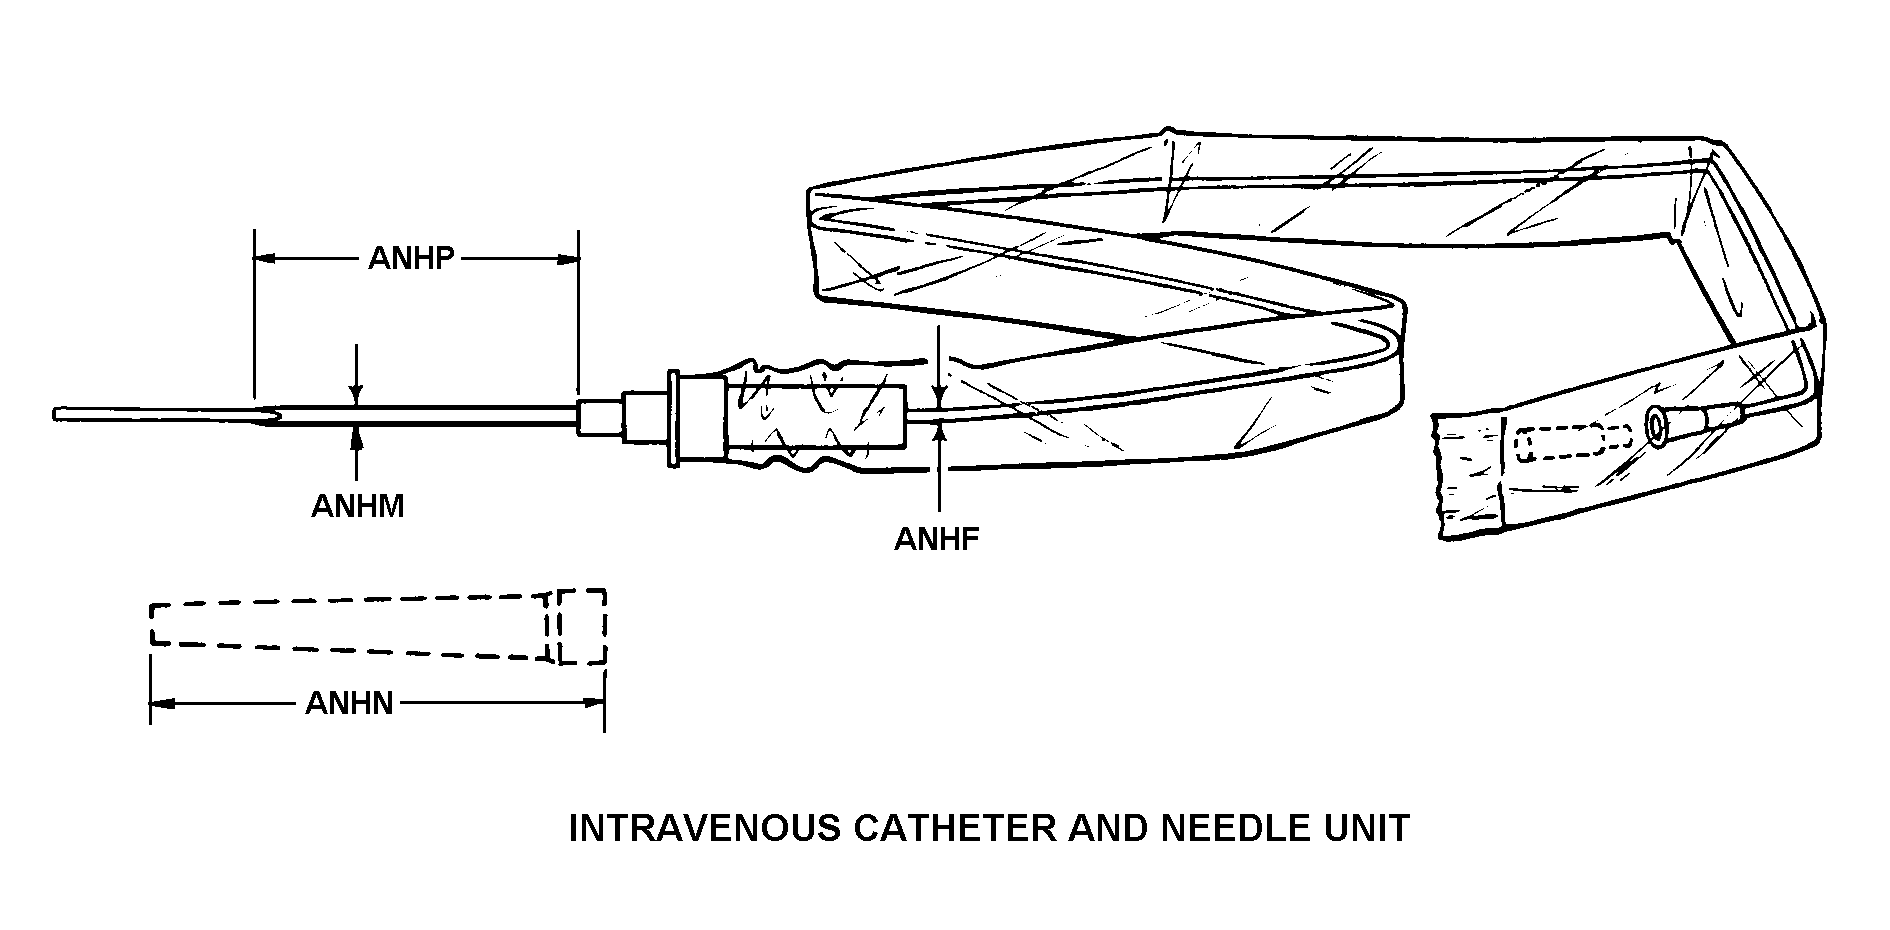 INTRAVENOUS CATHETER AND NEEDLE UNIT style nsn 6515-01-416-5026